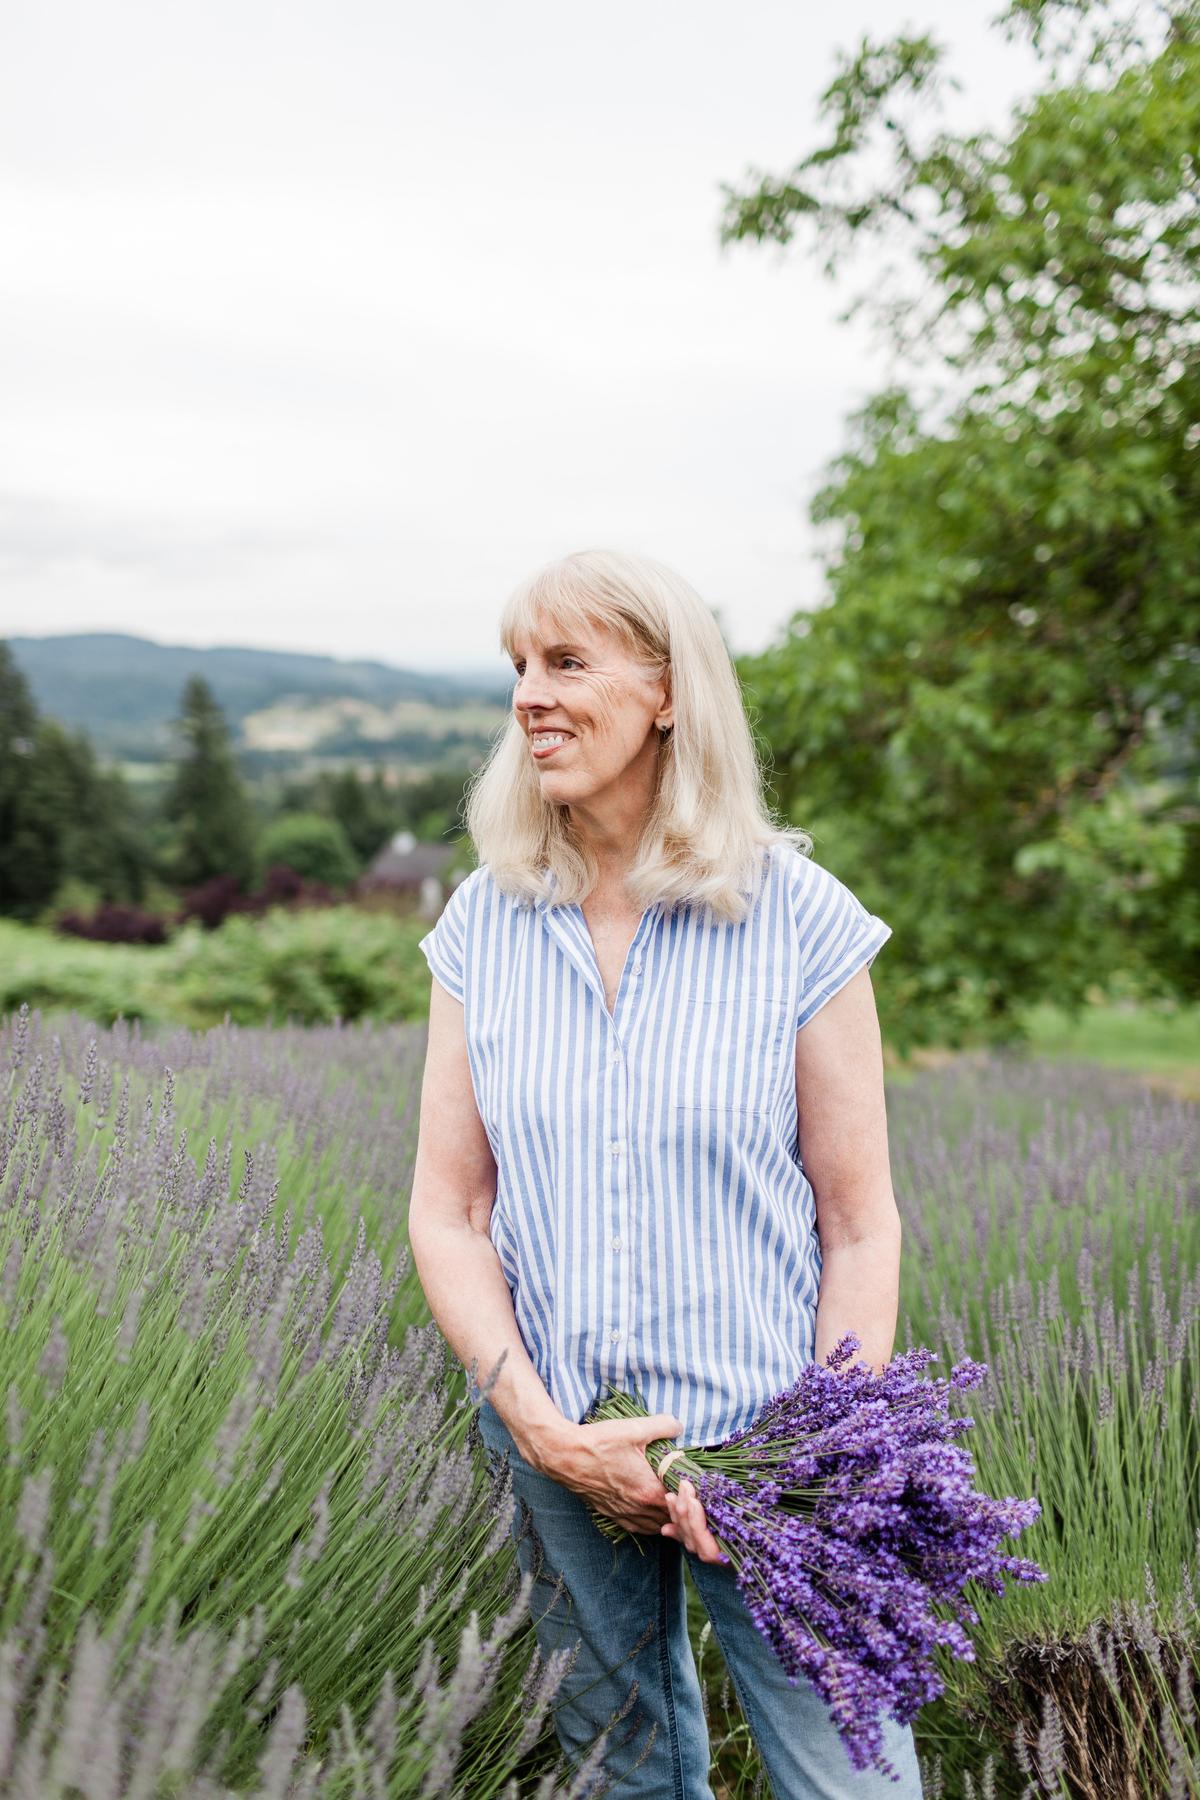 After losing her husband to Lou Gehrig’s disease, Marilyn Thompson started her lavender business as a way to make use of the plants on the dream property they had purchased together, while staying at home to be present for her youngest daughter. (Courtesy of Evernew Photography)